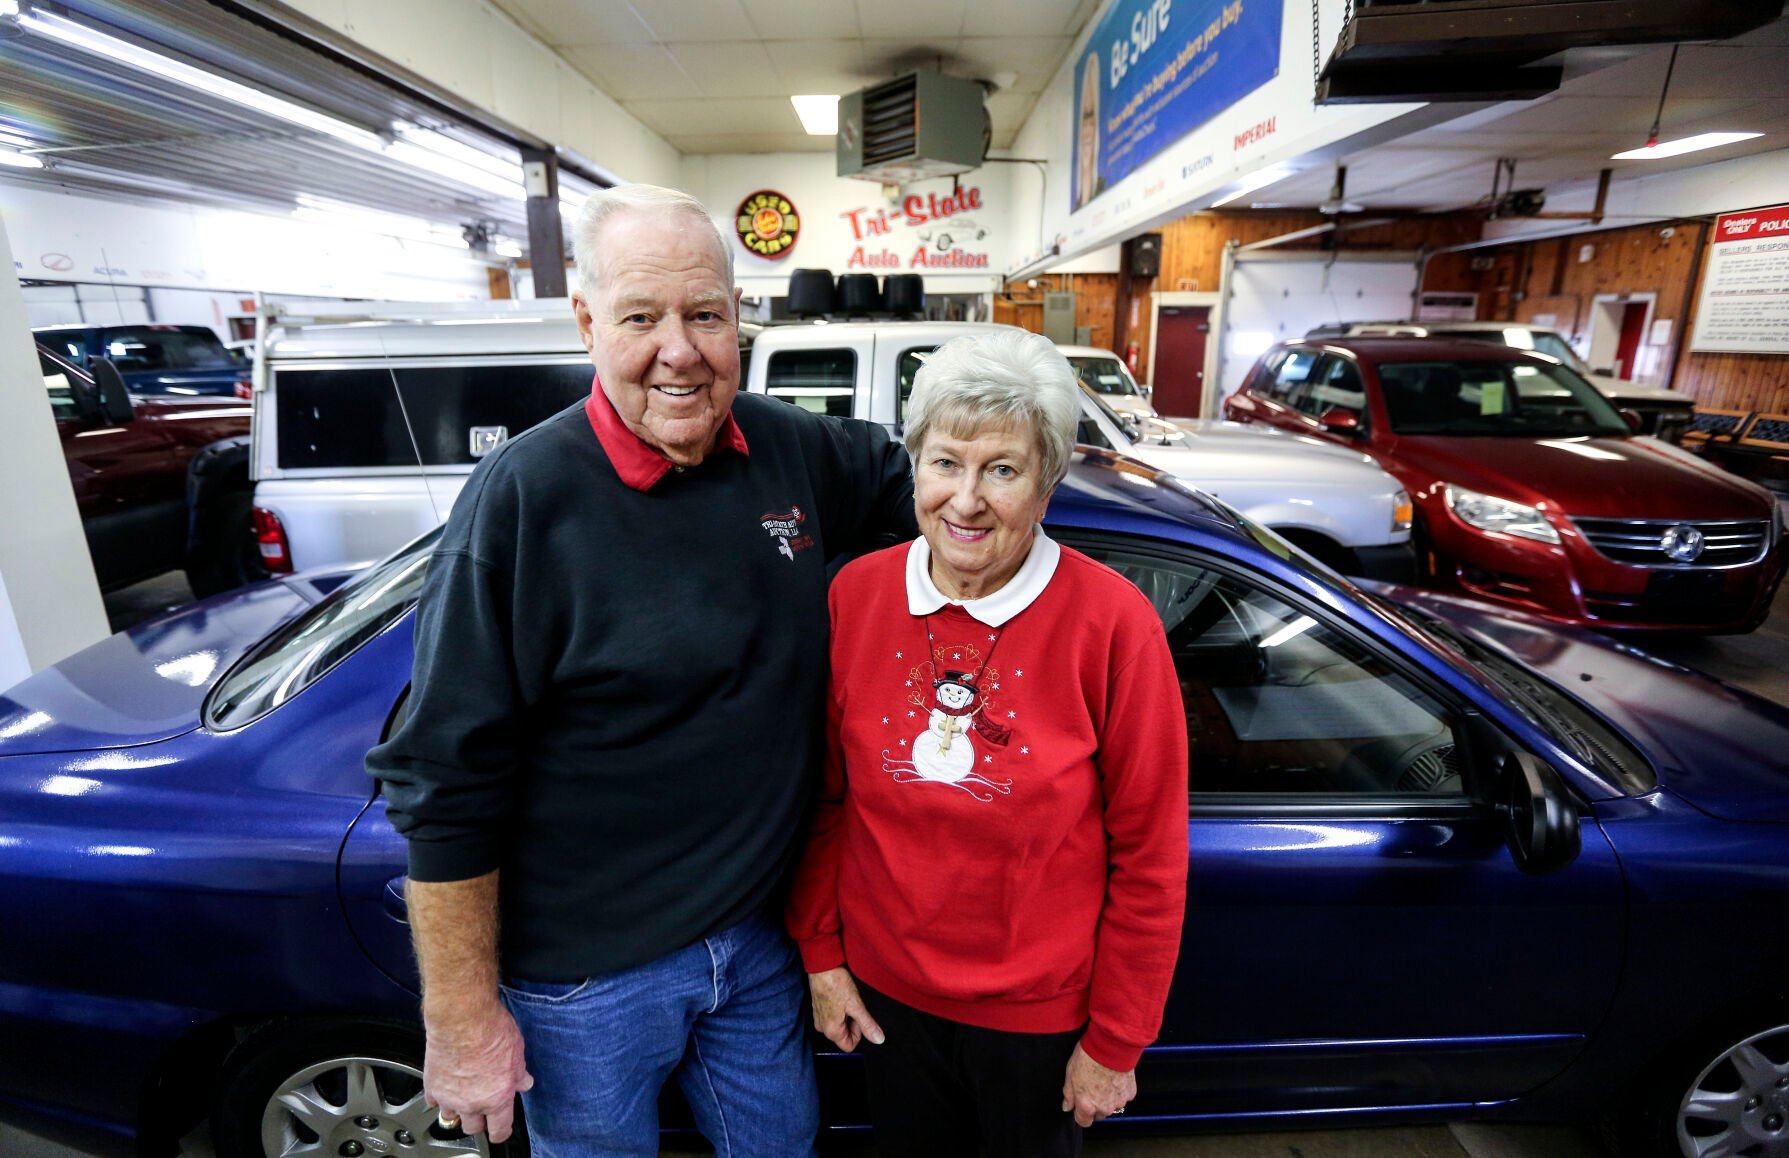 After more than 70 years in business, Jerry and Helen Brogley soon will close Tri-State Auto Auction. The business was started by Helen’s father in 1952.    PHOTO CREDIT: Dave Kettering